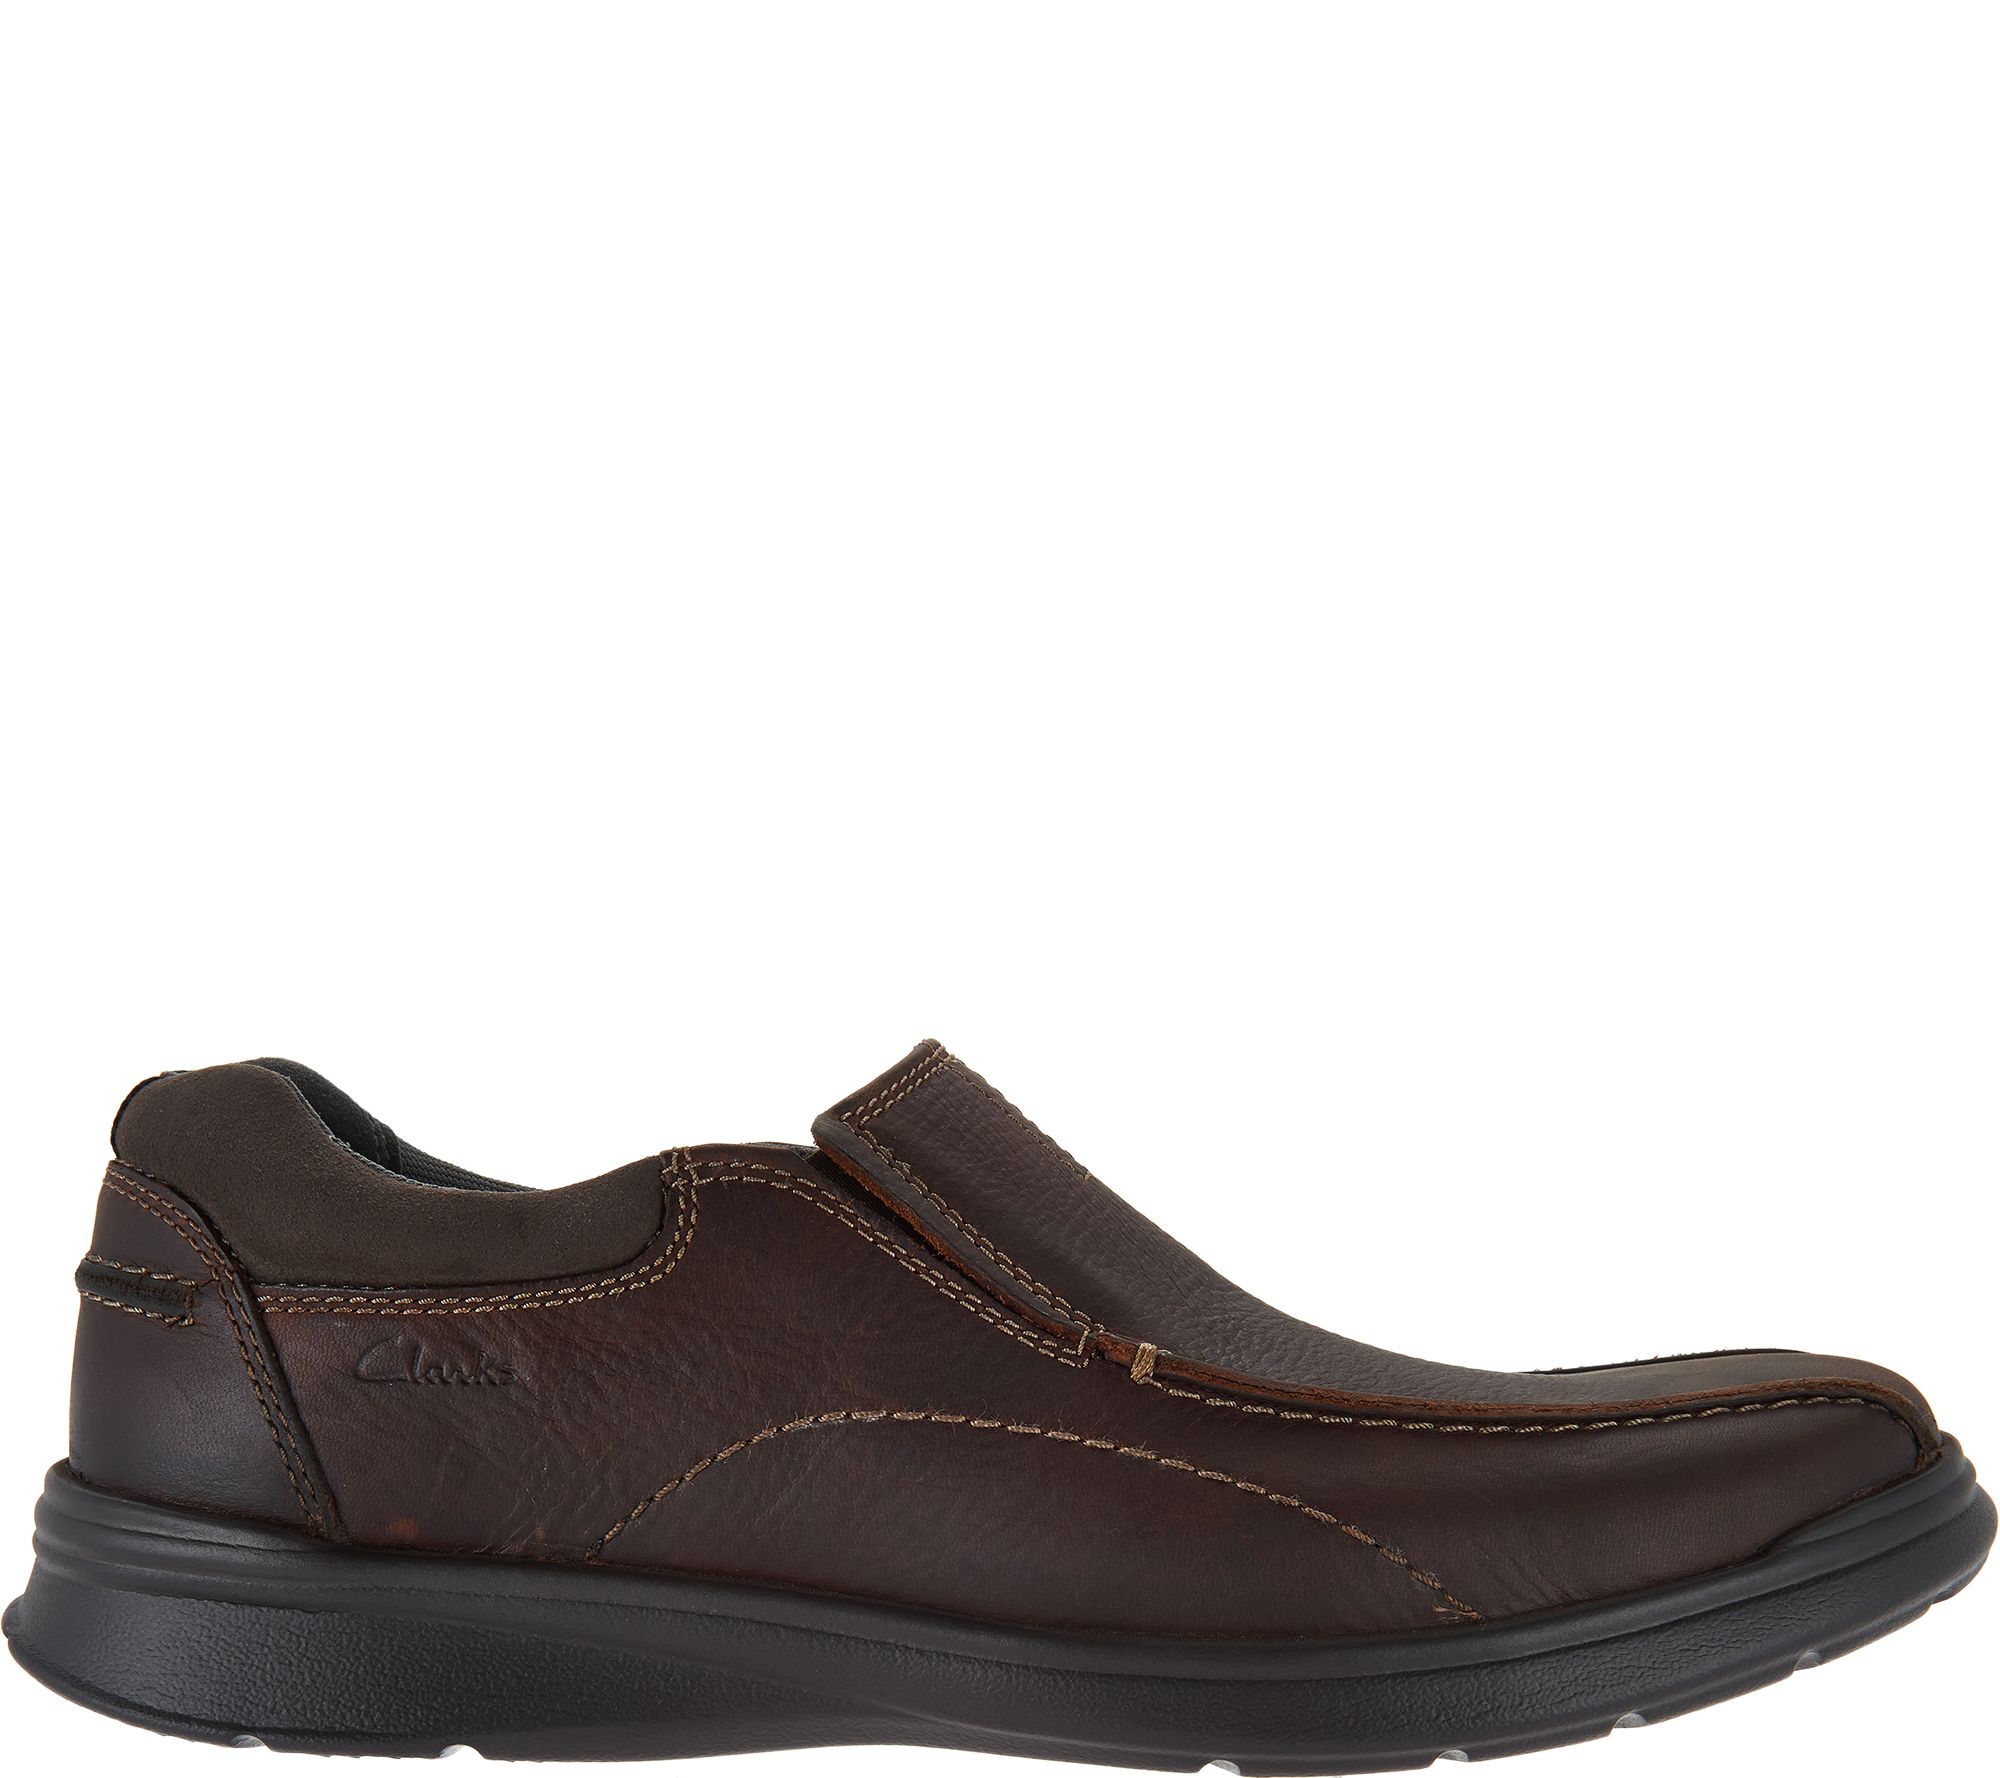 Clarks Men's Leather Slip-on Shoes - Cotrell Step - QVC.com